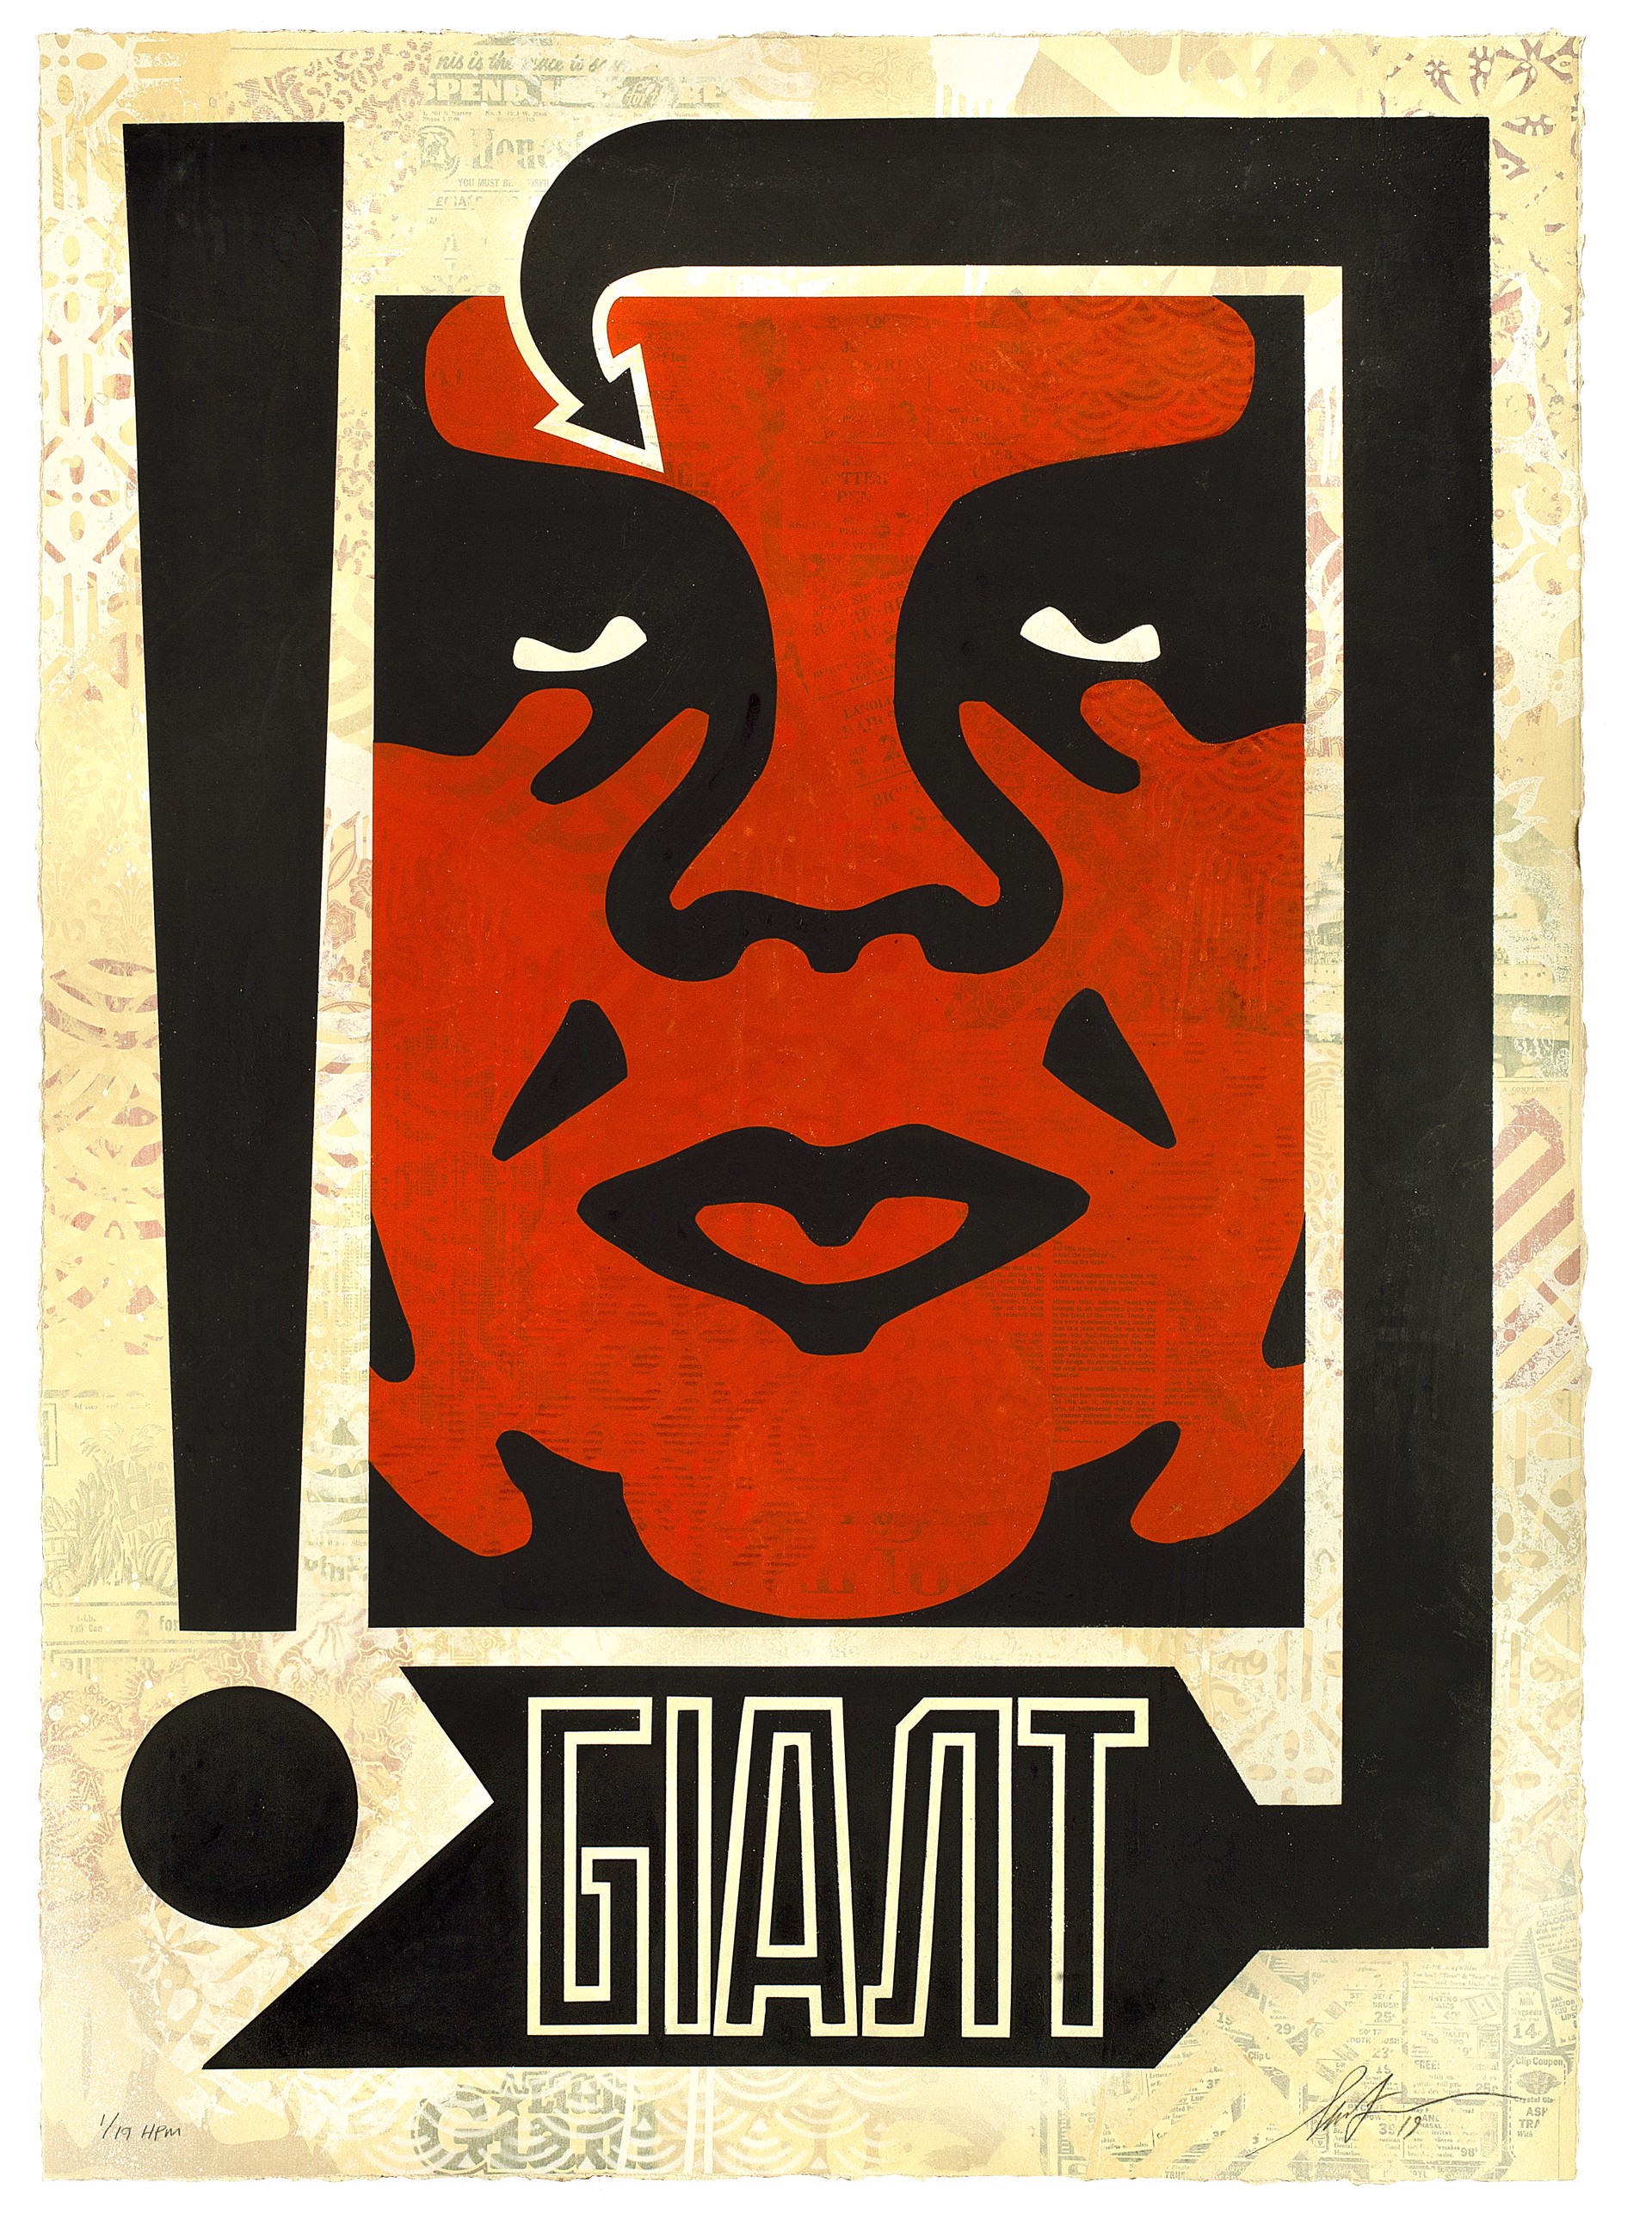 Exclamation, HPM (11/19) by Shepard Fairey